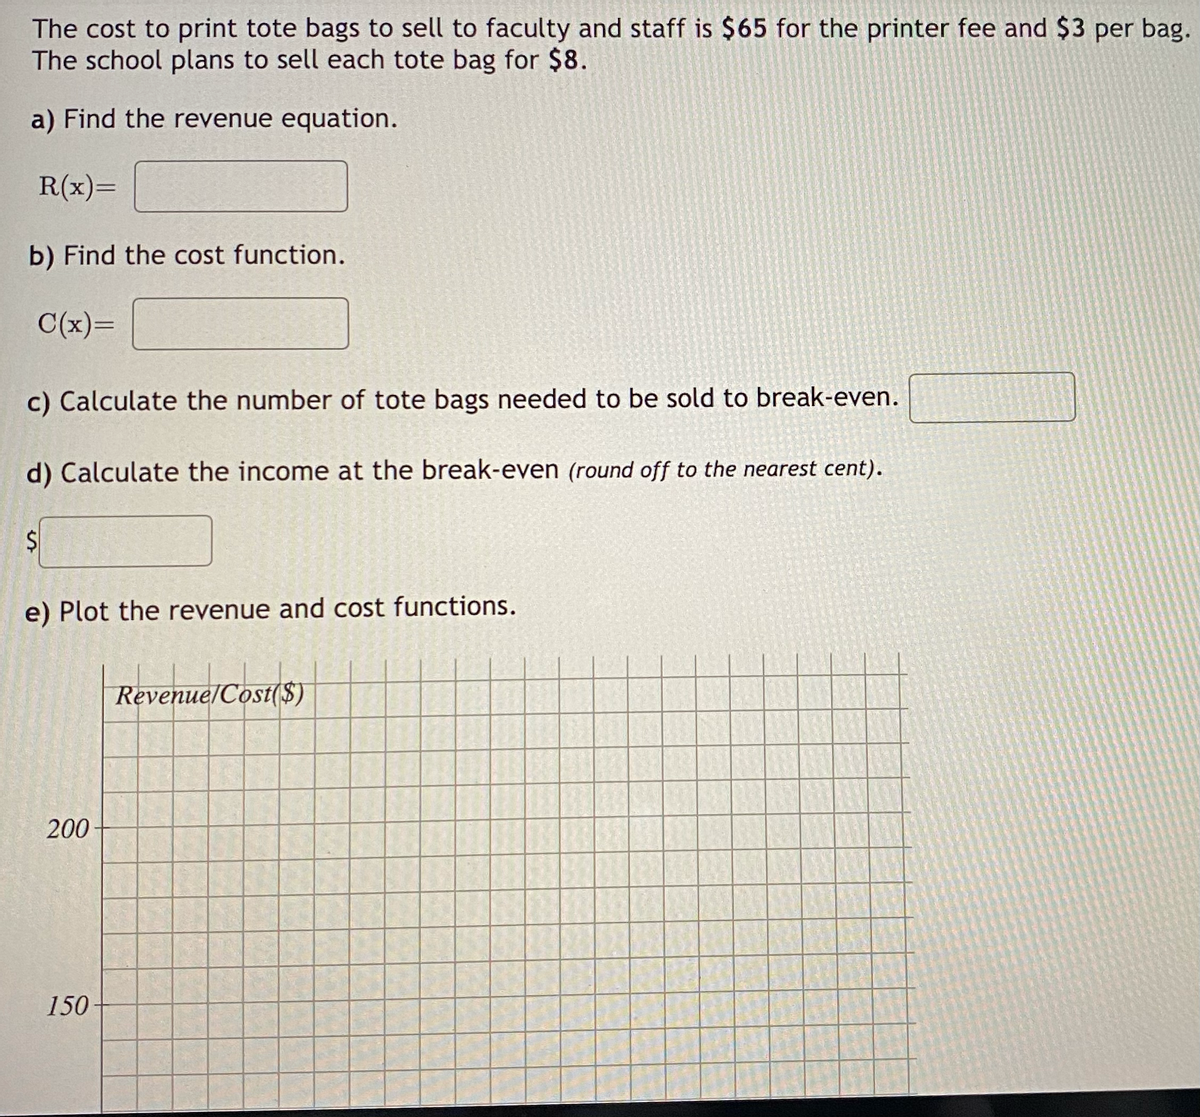 The cost to print tote bags to sell to faculty and staff is $65 for the printer fee and $3 per bag.
The school plans to sell each tote bag for $8.
a) Find the revenue equation.
R(x)=
b) Find the cost function.
C(x)=
c) Calculate the number of tote bags needed to be sold to break-even.
d) Calculate the income at the break-even (round off to the nearest cent).
S
e) Plot the revenue and cost functions.
200
150
Revenue/Cost($)